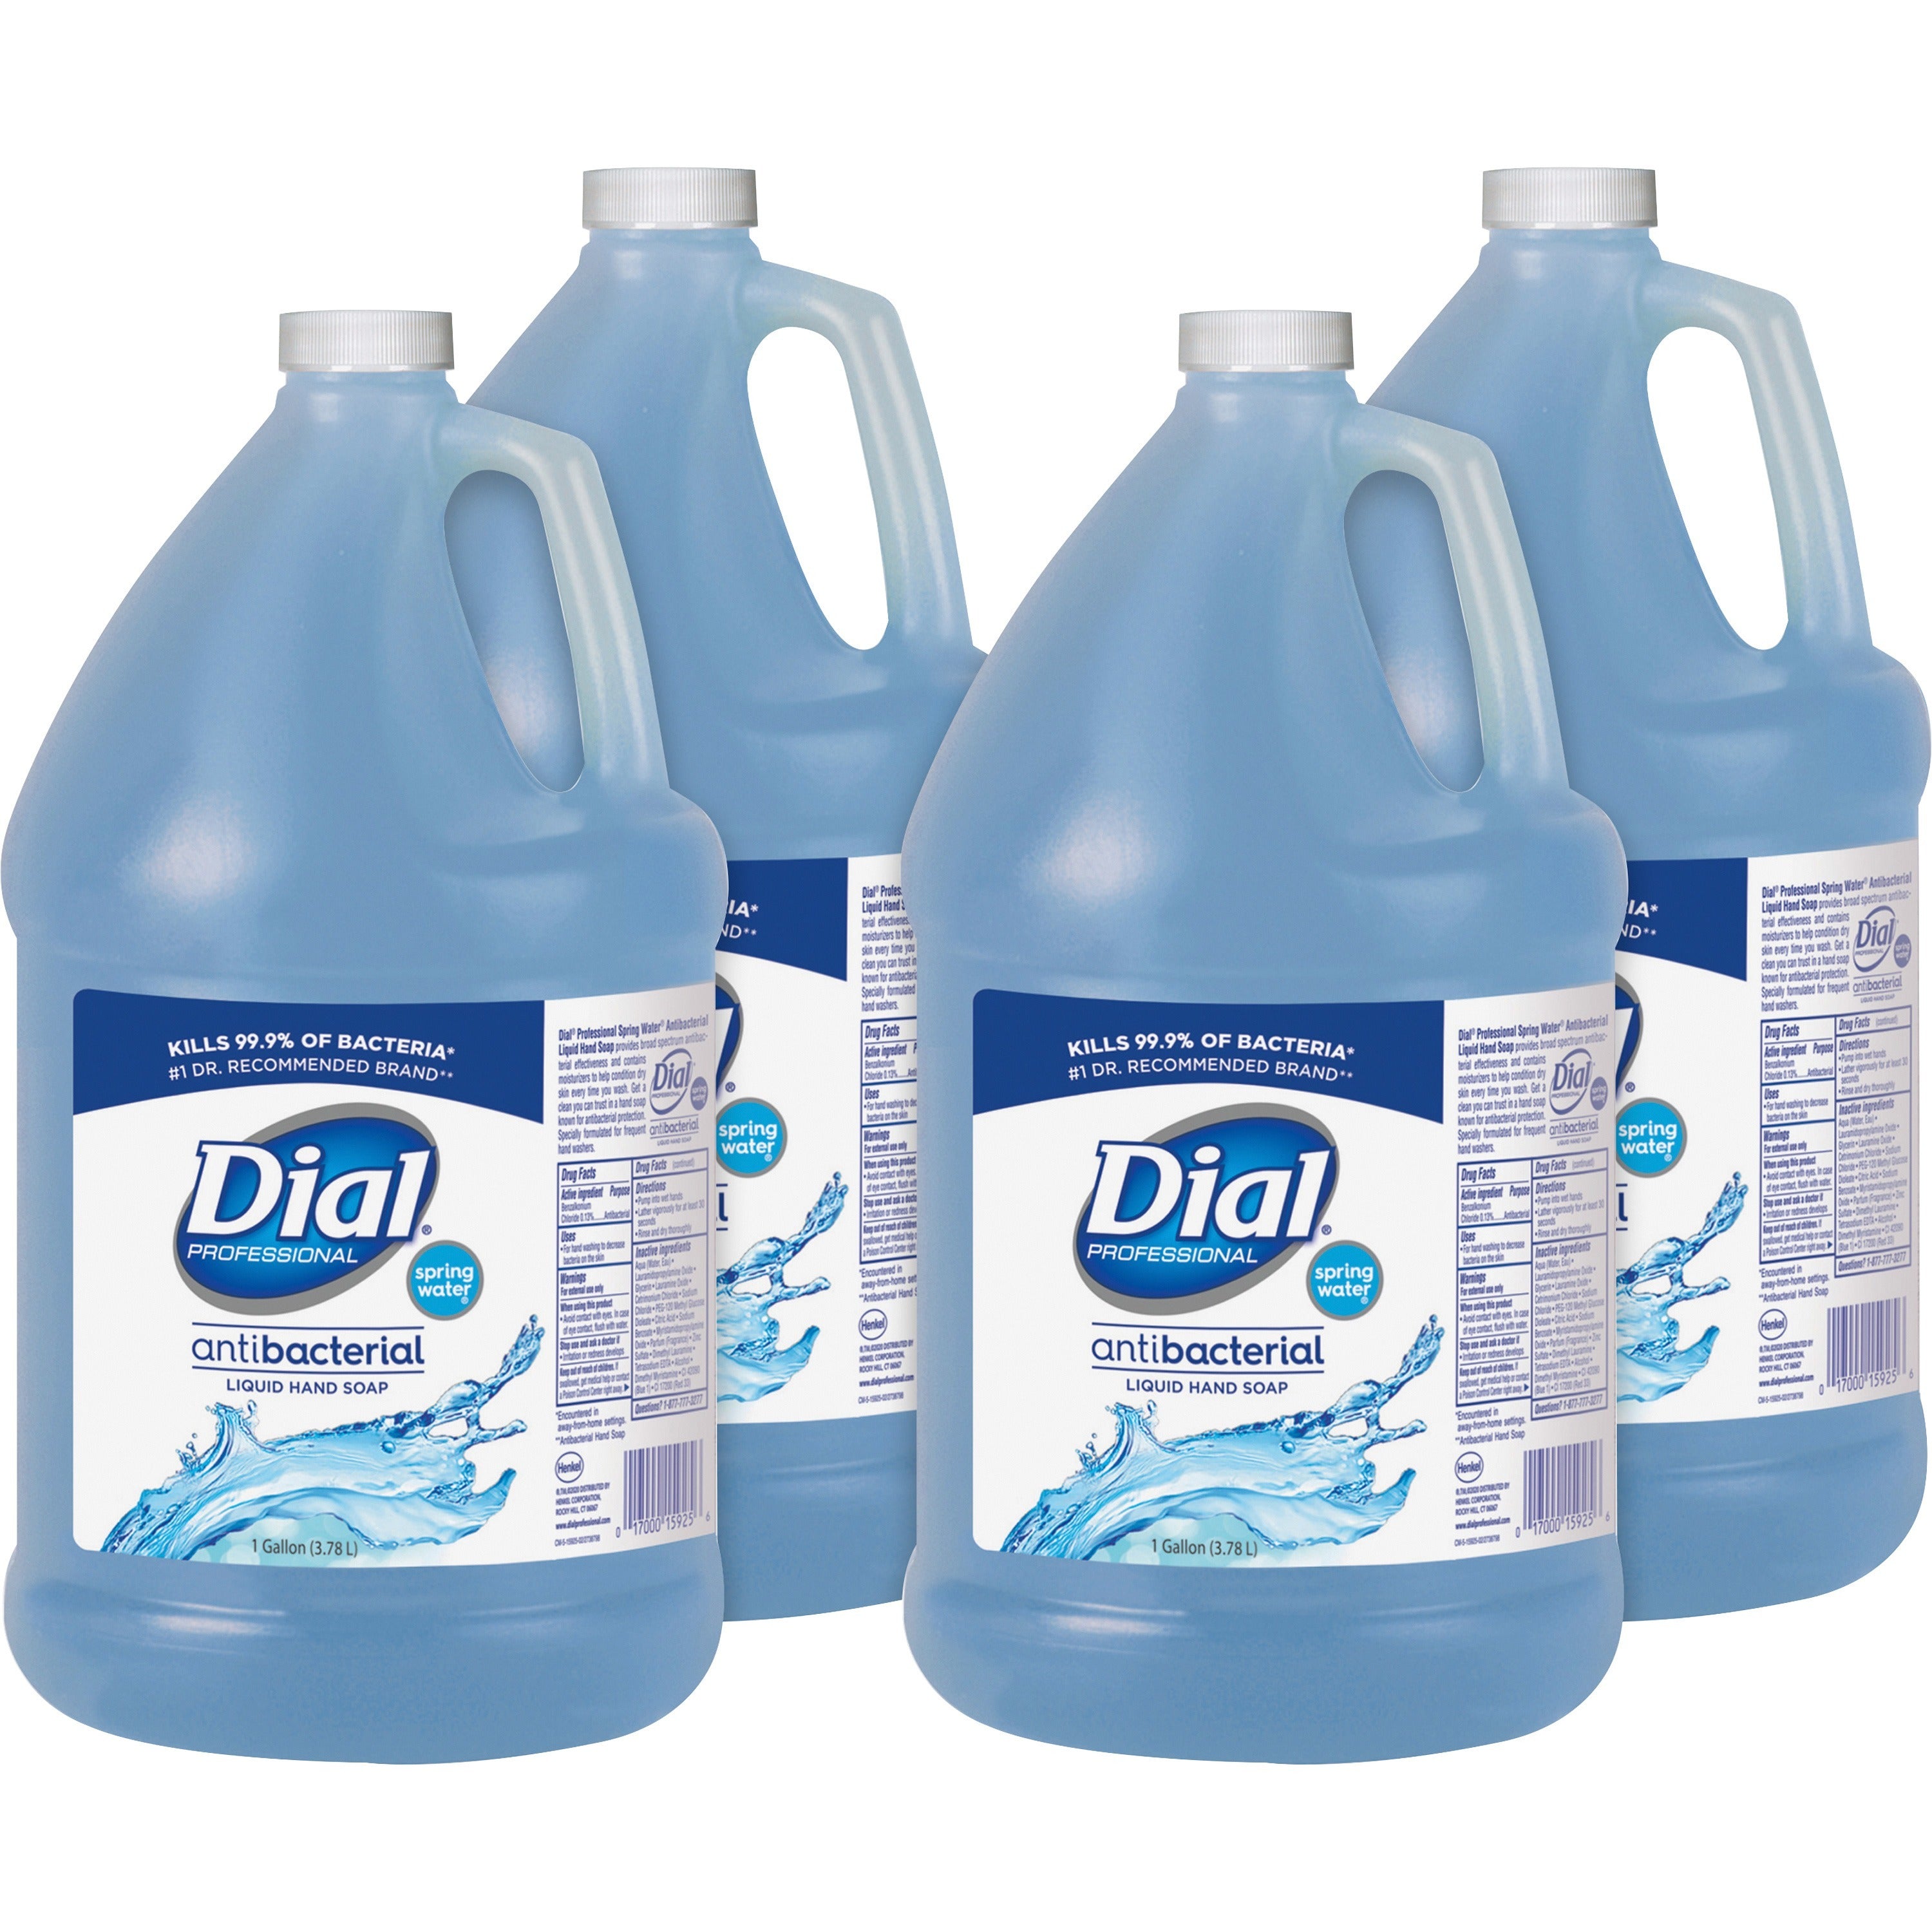 dial-spring-water-scent-liquid-hand-soap-spring-water-scentfor-1-gal-38-l-kill-germs-hand-moisturizing-blue-4-carton_dia15926ct - 1